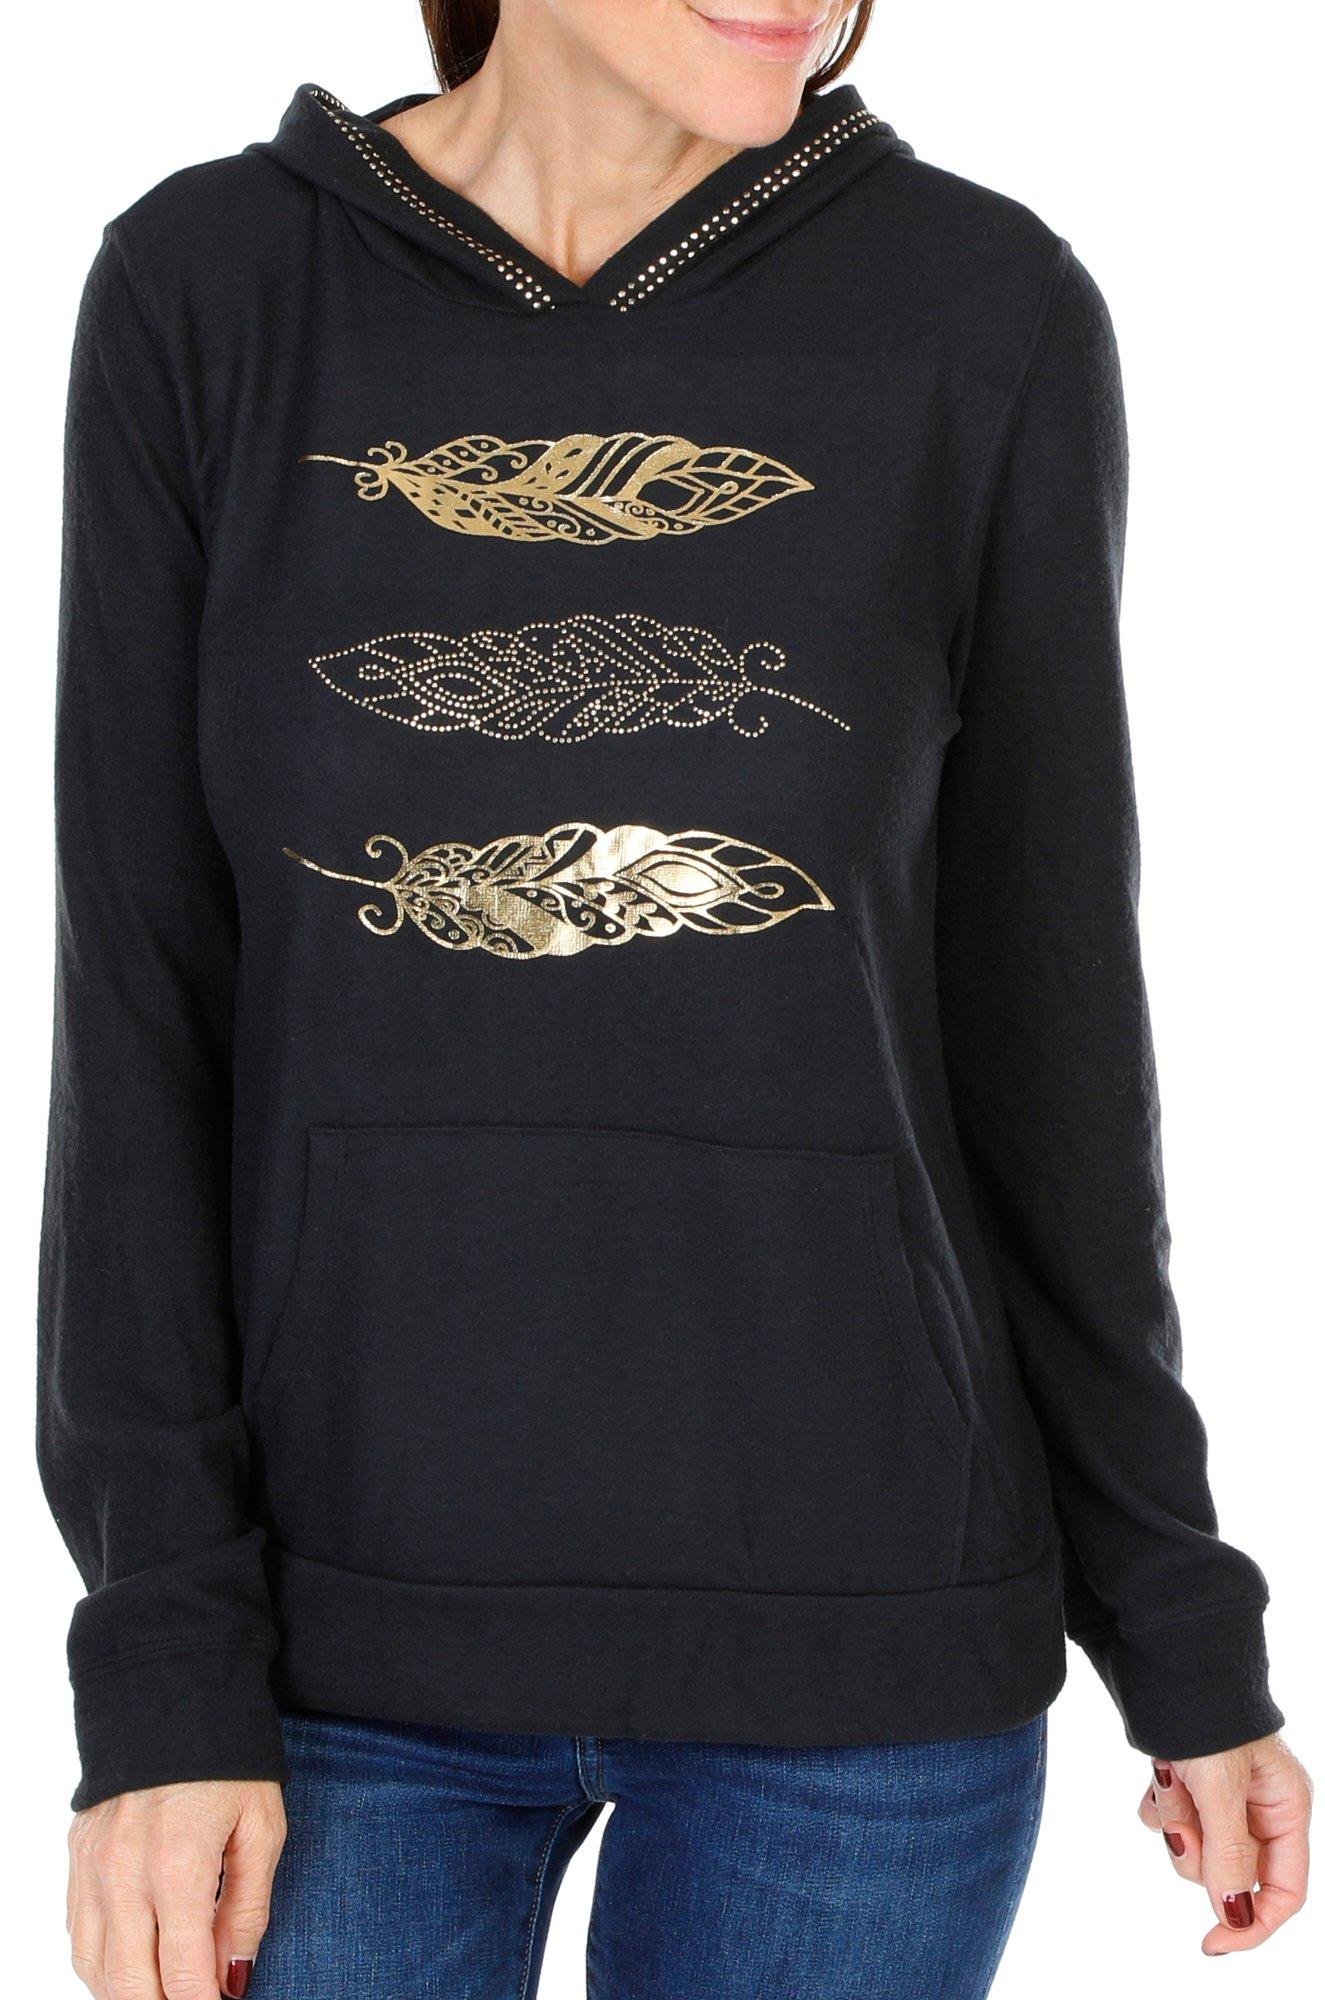 Women's Feather Embellished Pullover Hoodie - Black